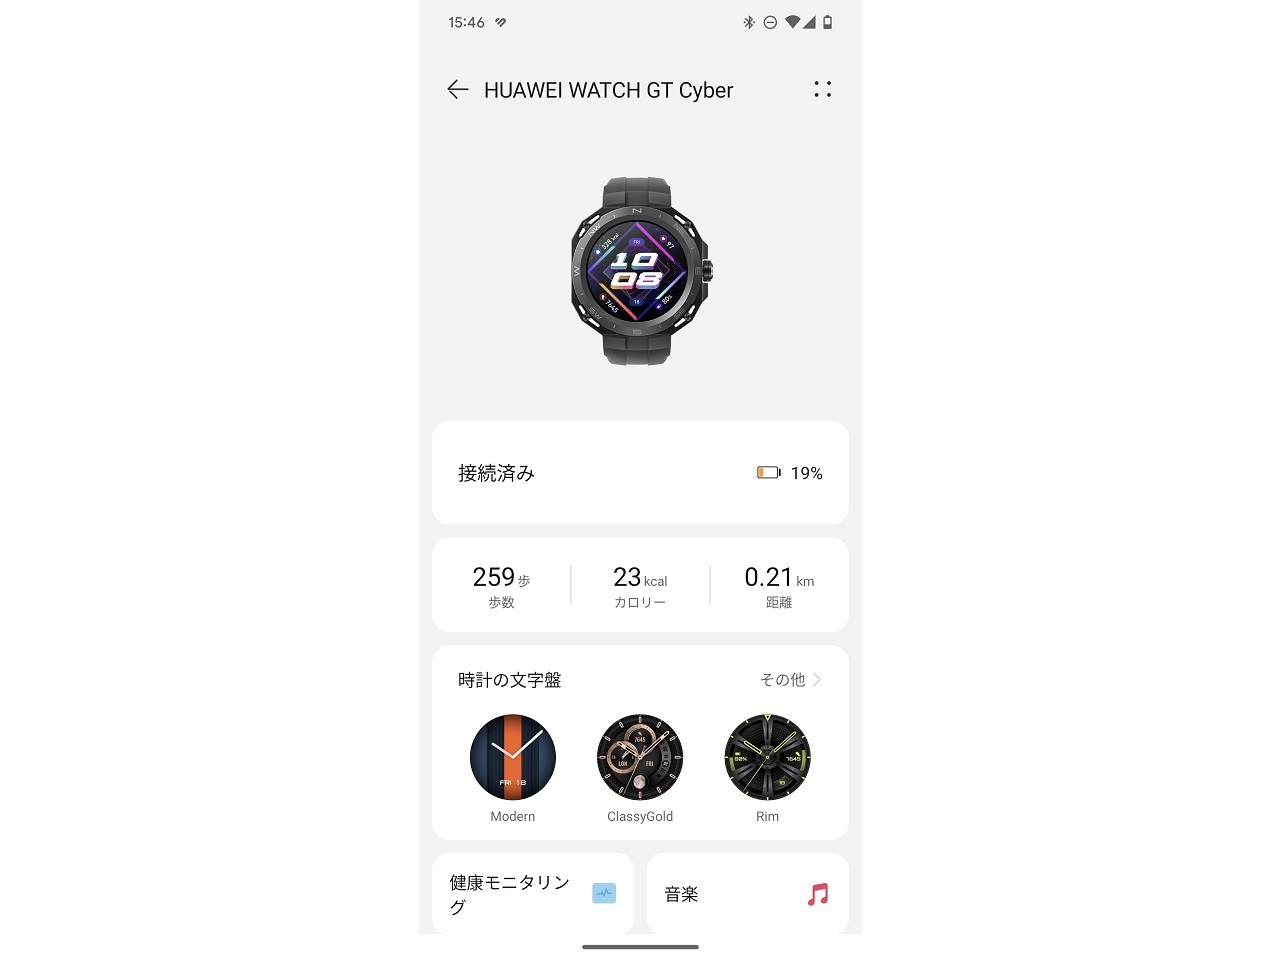 「HUAWEIヘルスケア」から「HUAWEI WATCH GT Cyber」をセットアップ。文字盤の変更や各種設定もアプリから行える